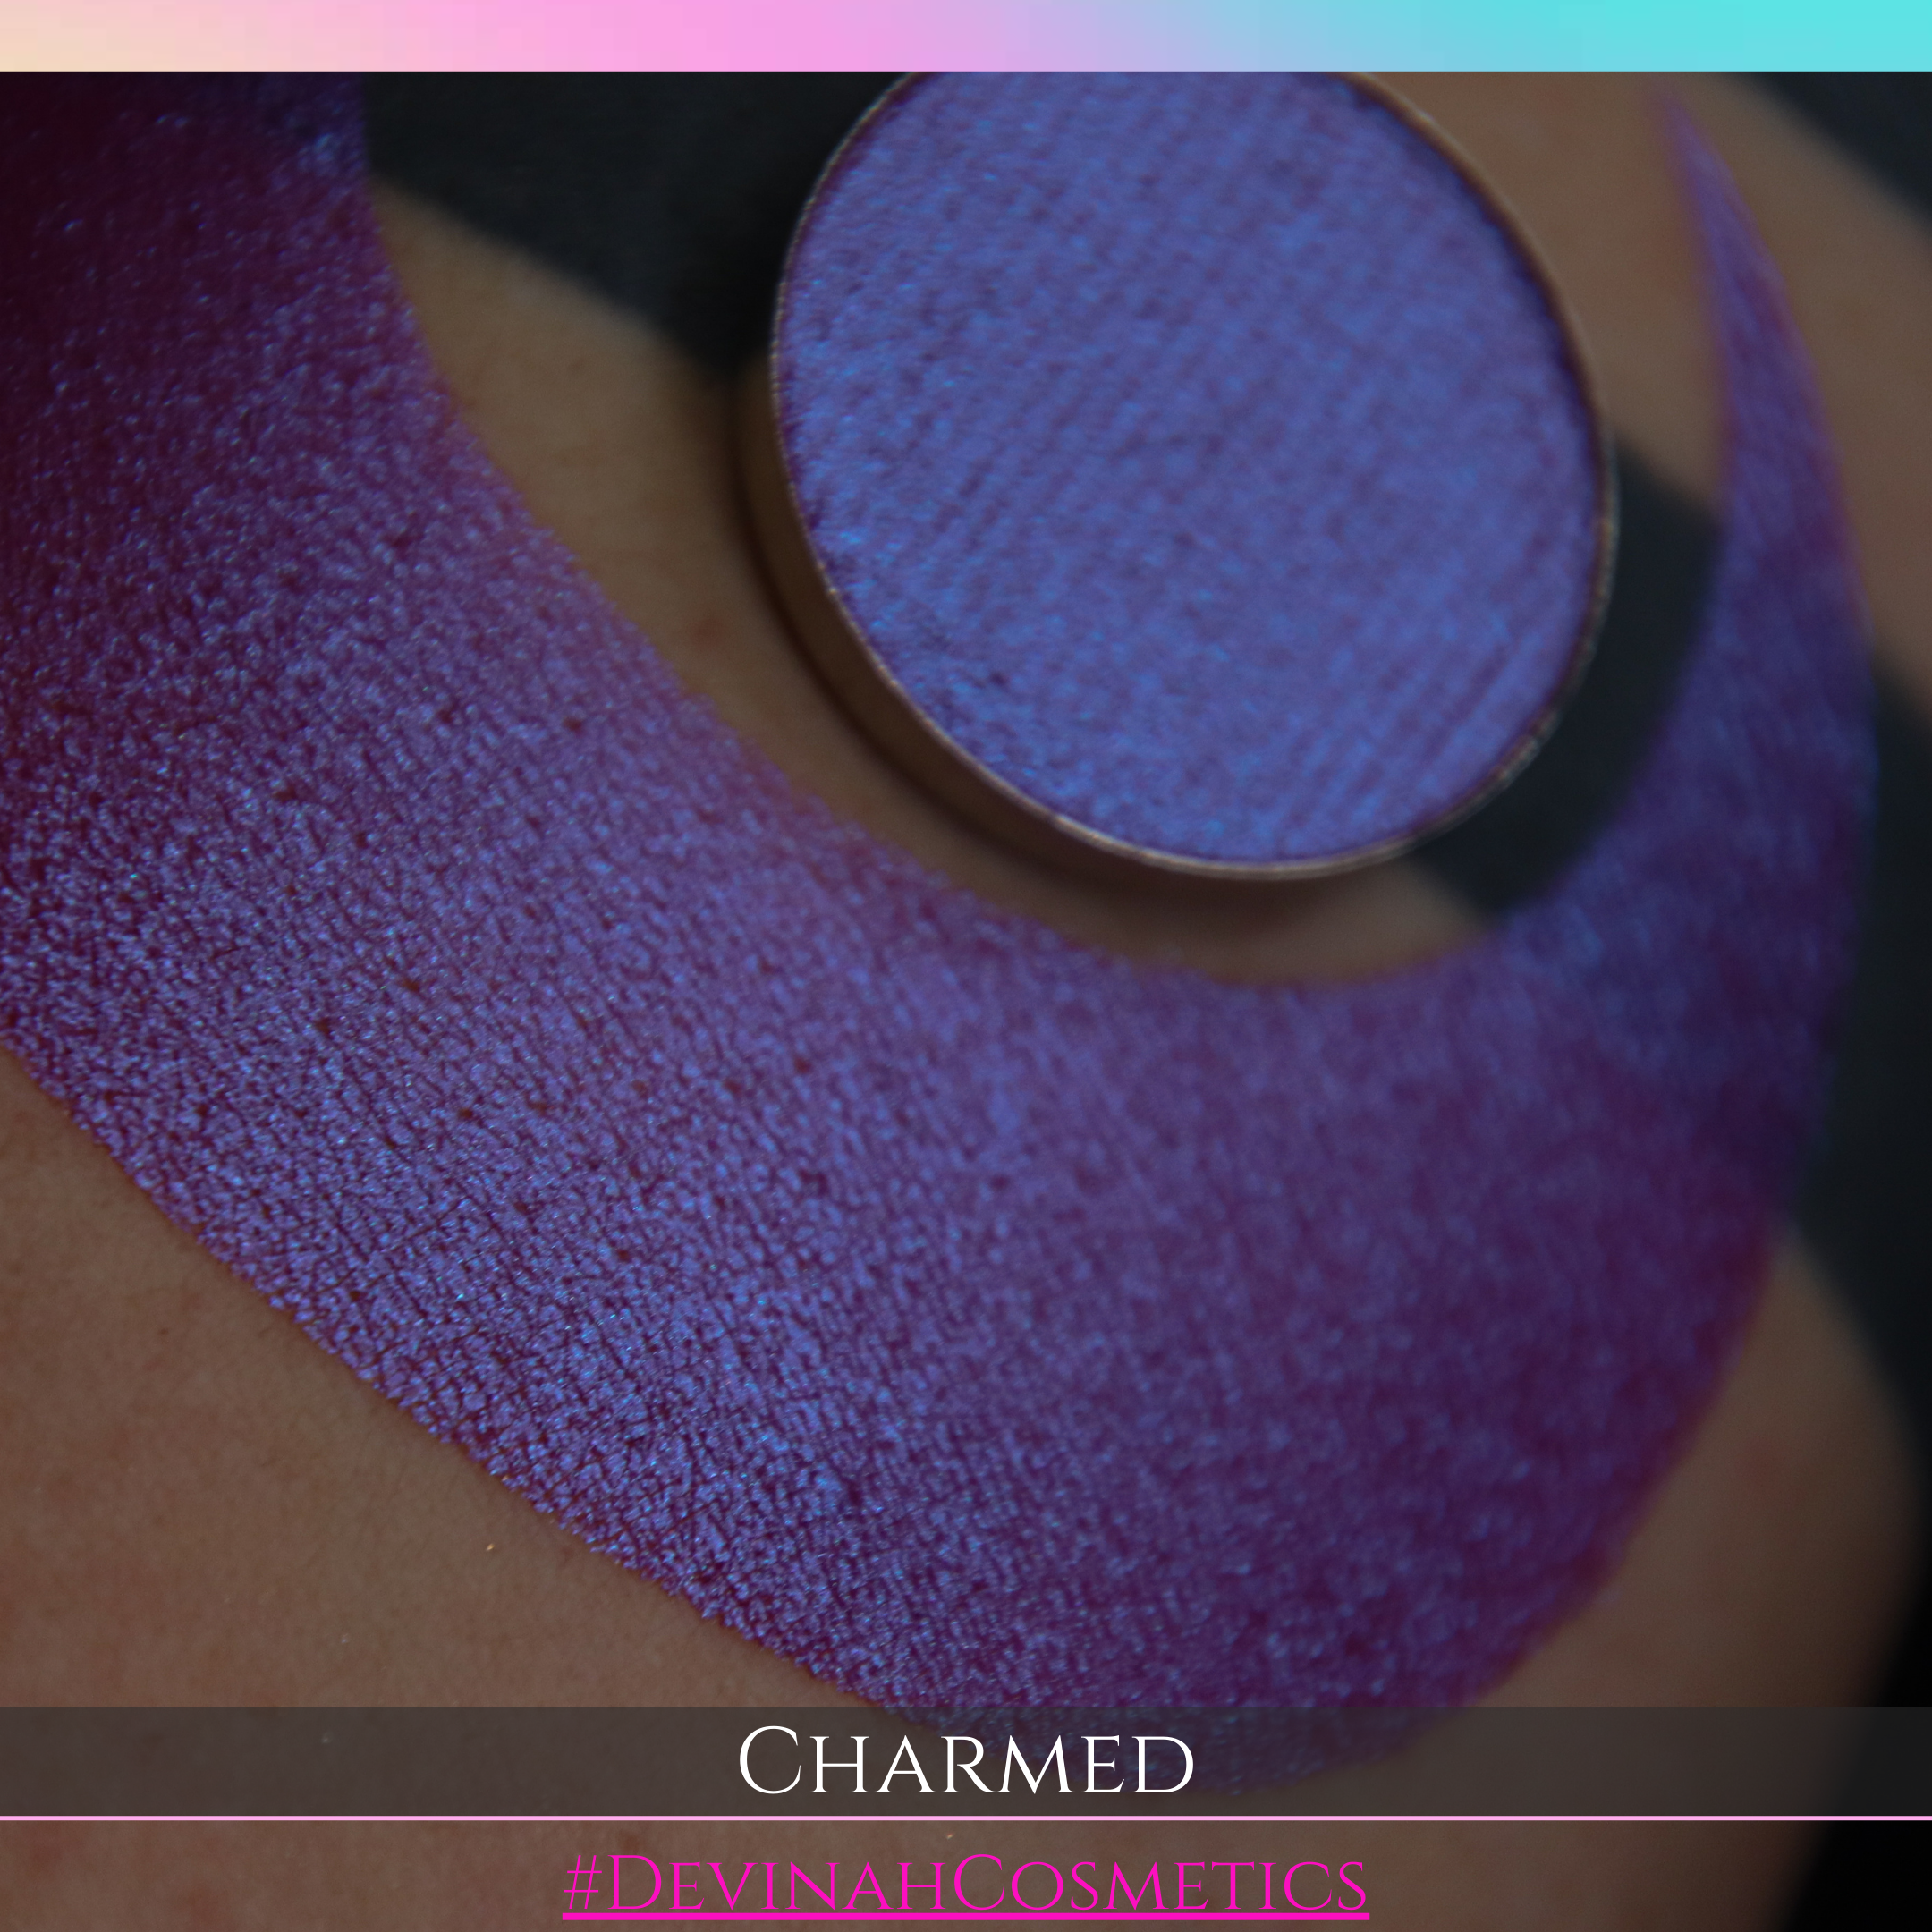 CHARMED Pressed Pigment